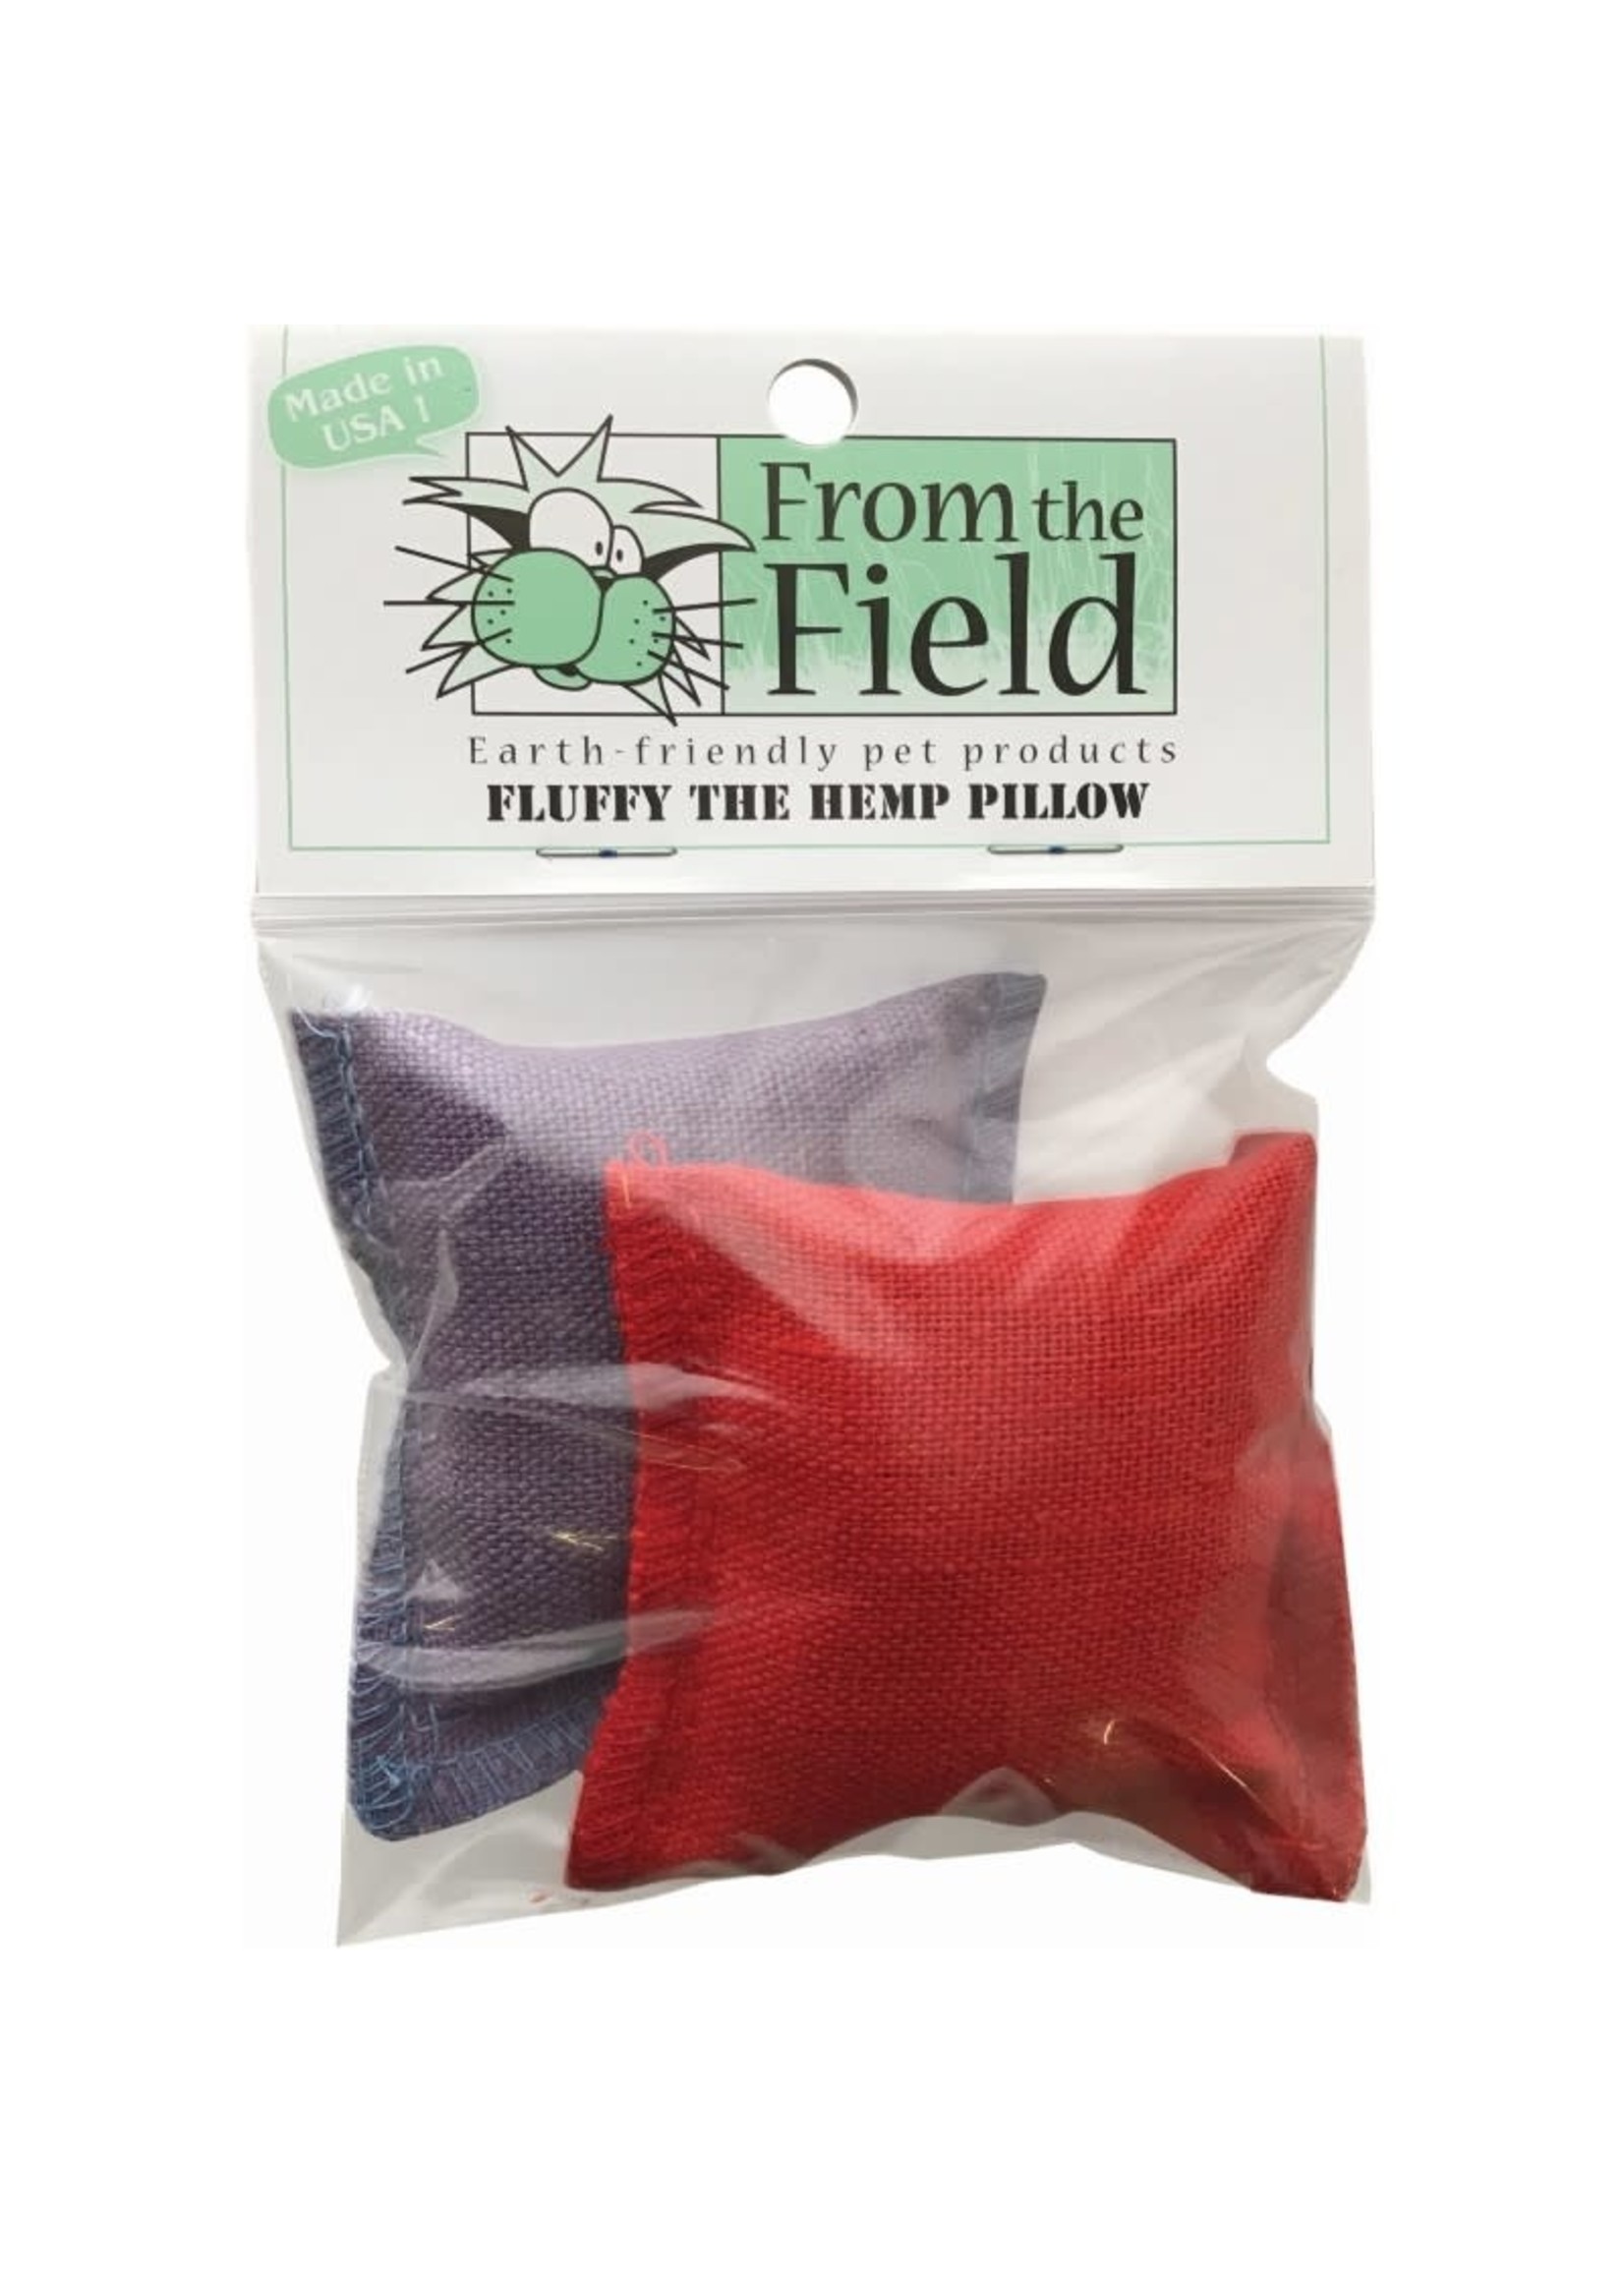 From The Field From the Field Fluffy Hemp Pillow Packaged